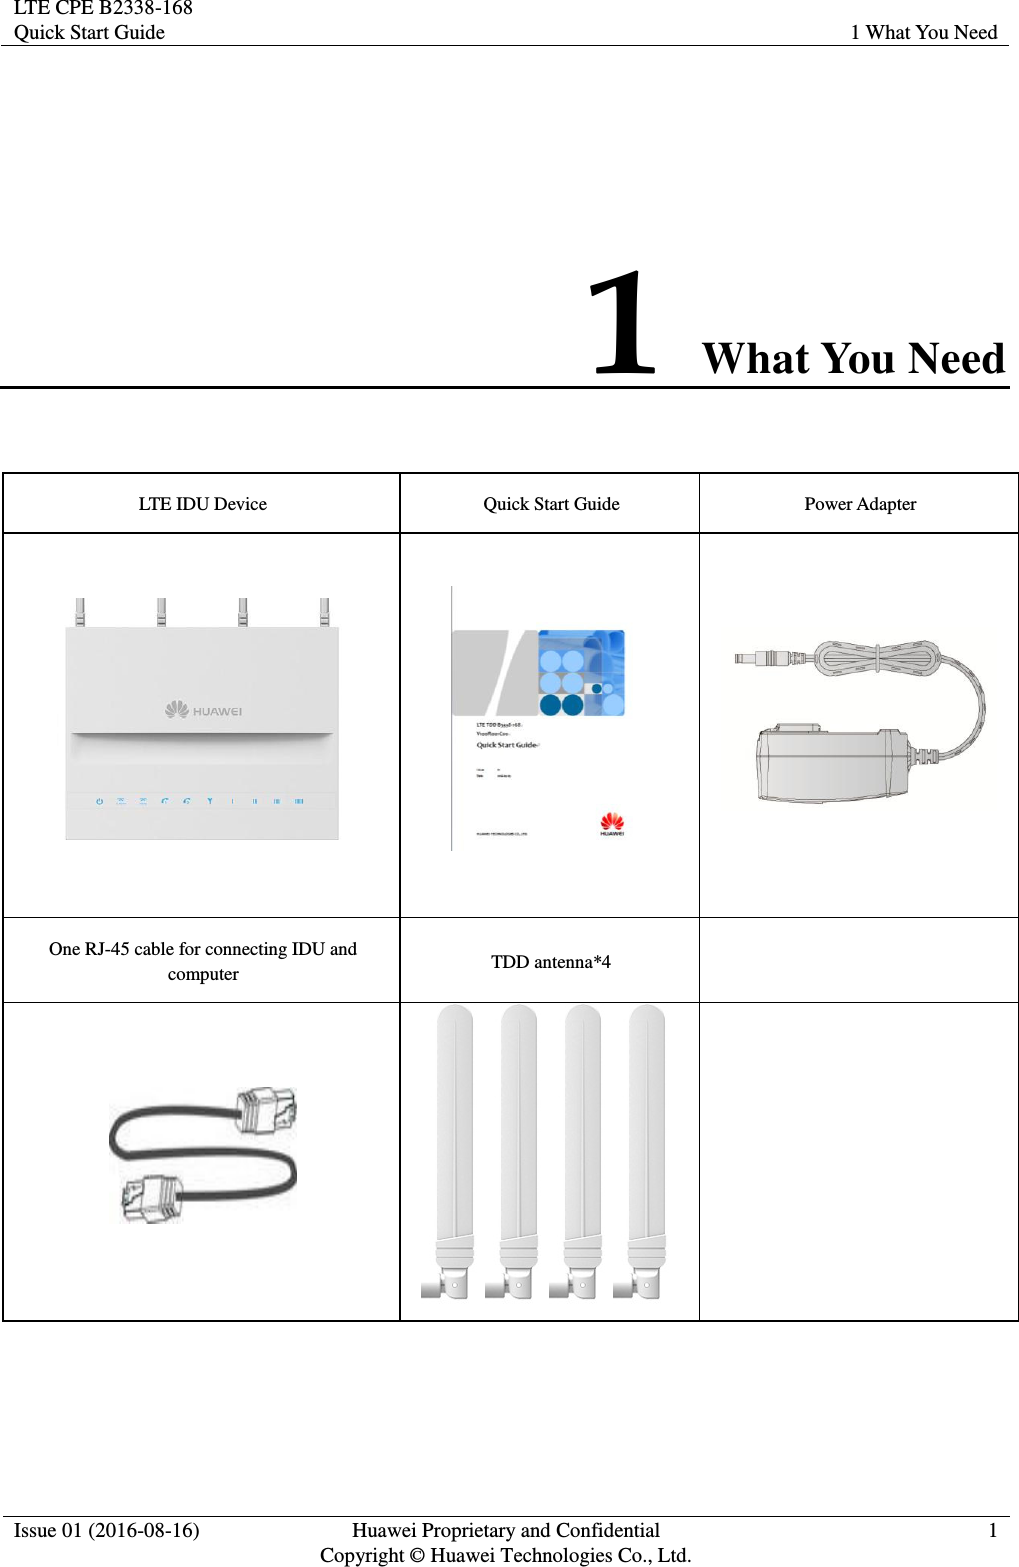 LTE CPE B2338-168 Quick Start Guide 1 What You Need  Issue 01 (2016-08-16) Huawei Proprietary and Confidential         Copyright © Huawei Technologies Co., Ltd. 1  1 What You Need LTE IDU Device Quick Start Guide Power Adapter    One RJ-45 cable for connecting IDU and computer TDD antenna*4     